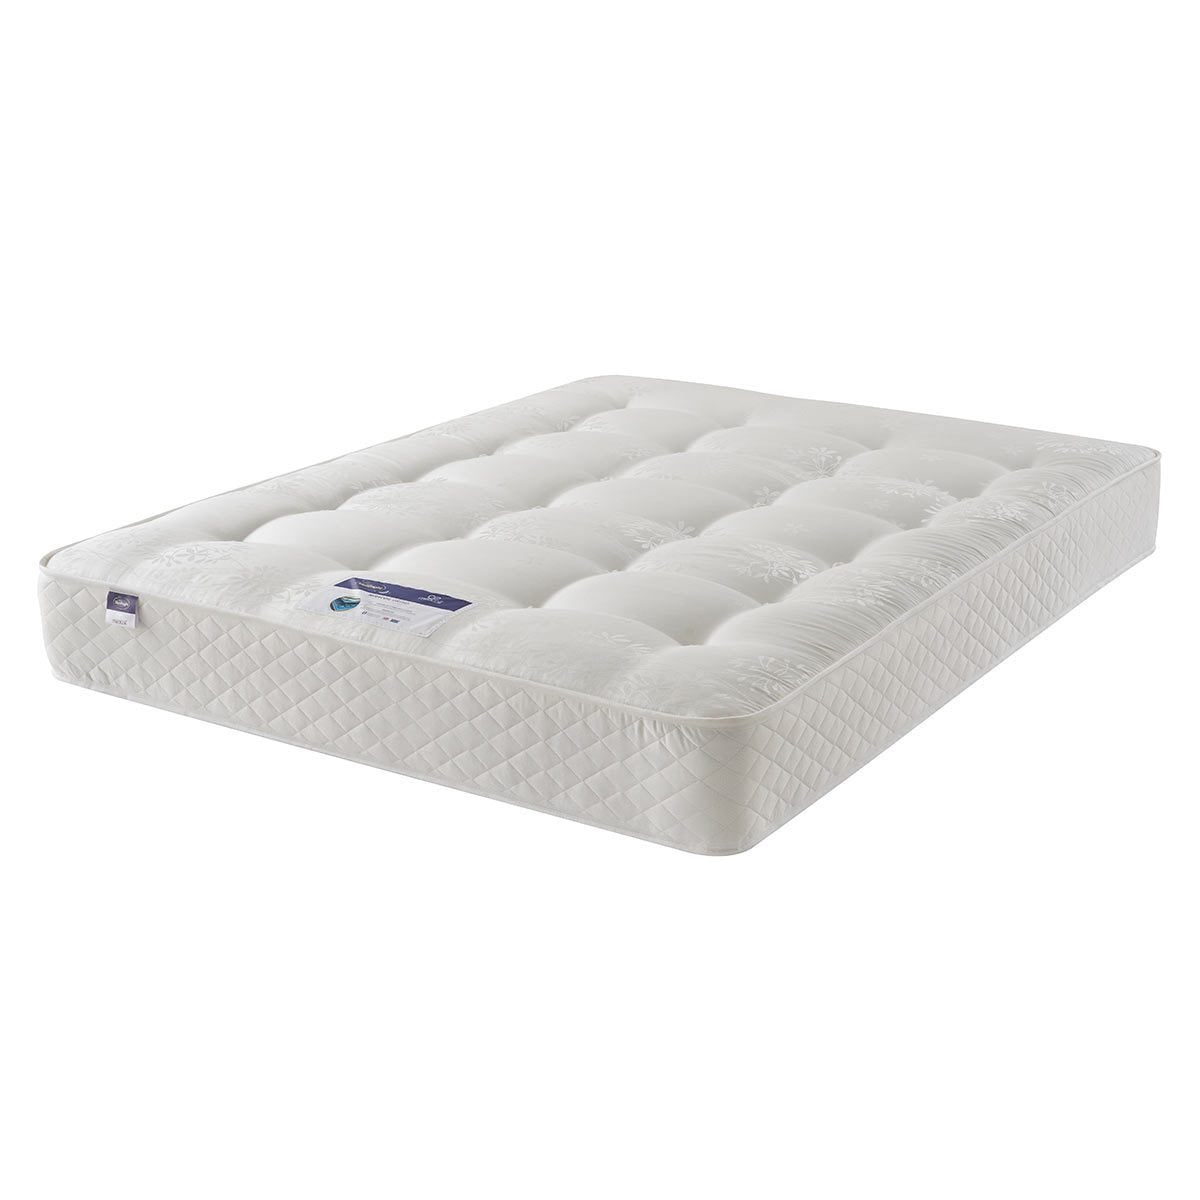 Silentnight Bexley Eco Miracoil Ortho Mattress Collection - Signature Retail Stores